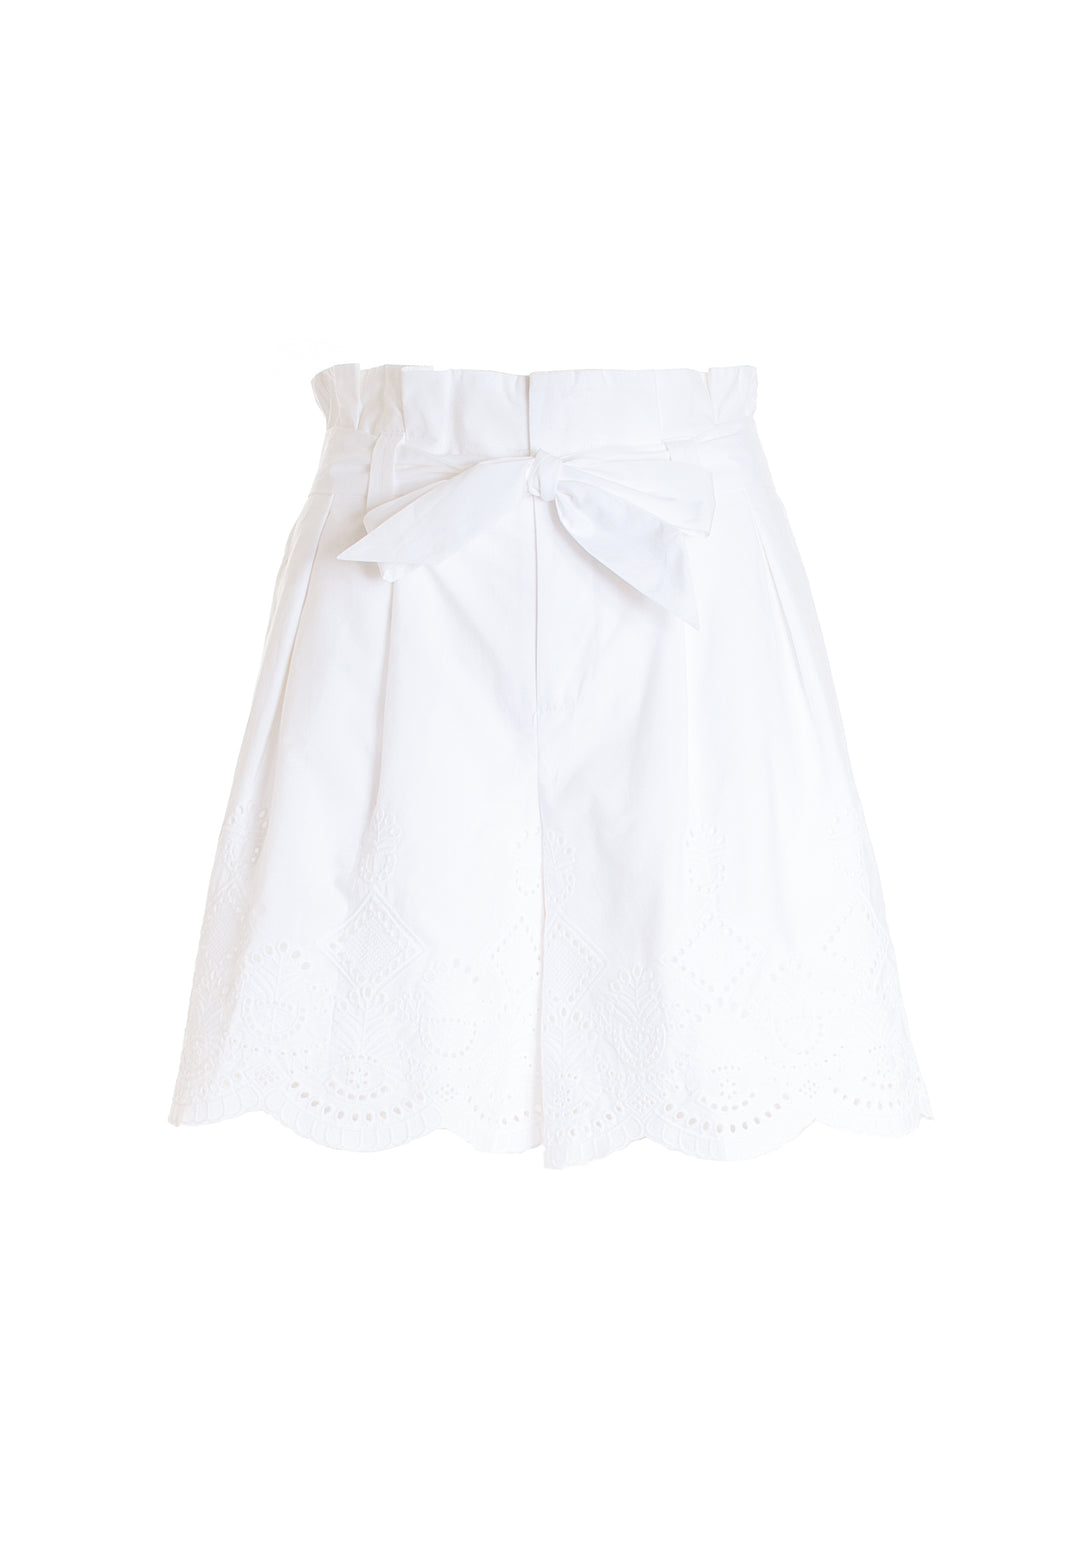 Short pant wide fit made in San Gallo lace